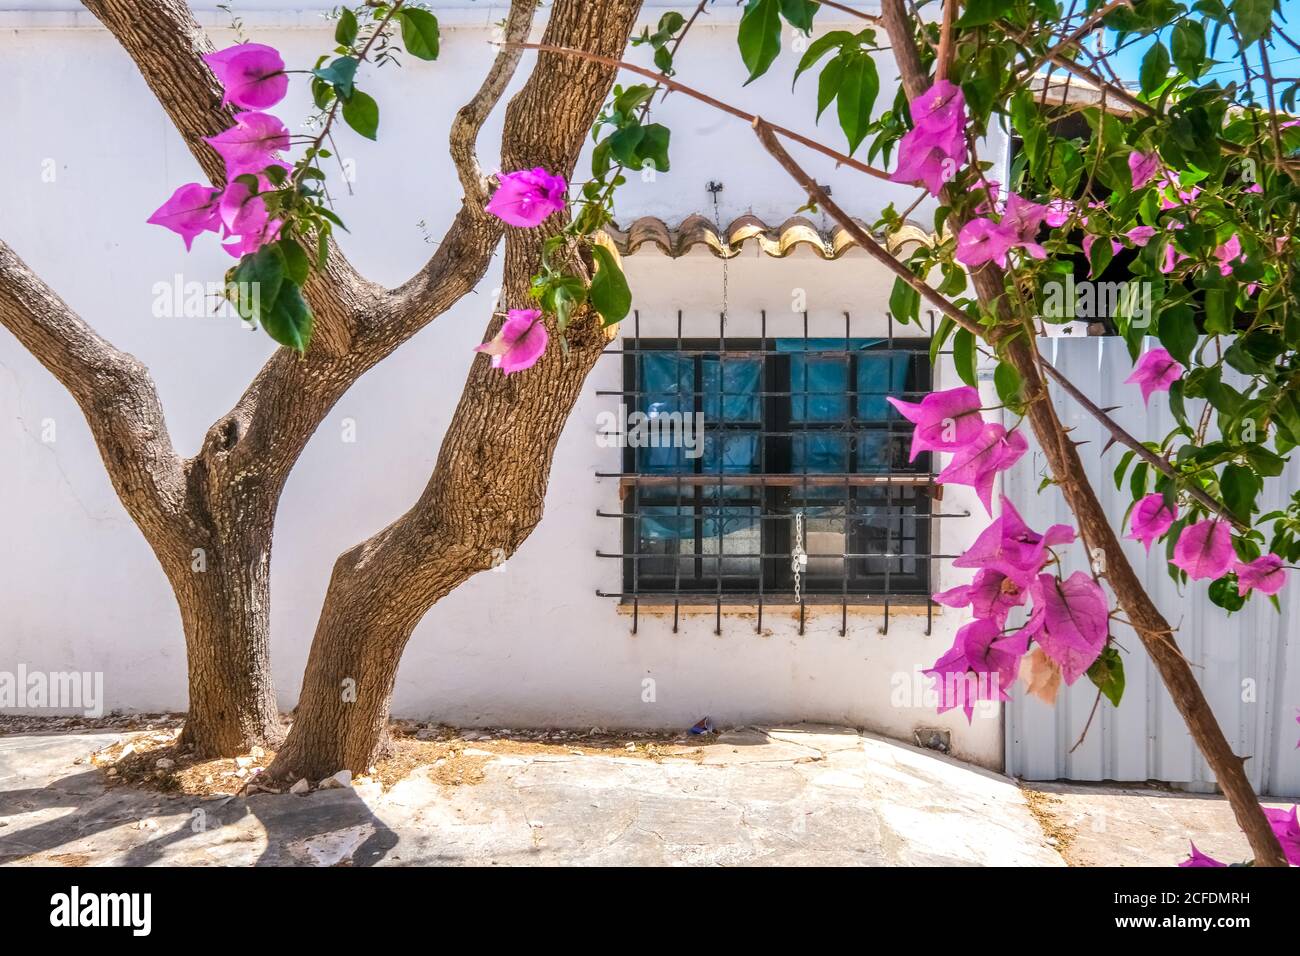 Olive tree and flowering bougainvillea in a back yard in the resort of Cala d'Or on the south-east coast of Mallorca. barred window, Santanyí, Stock Photo